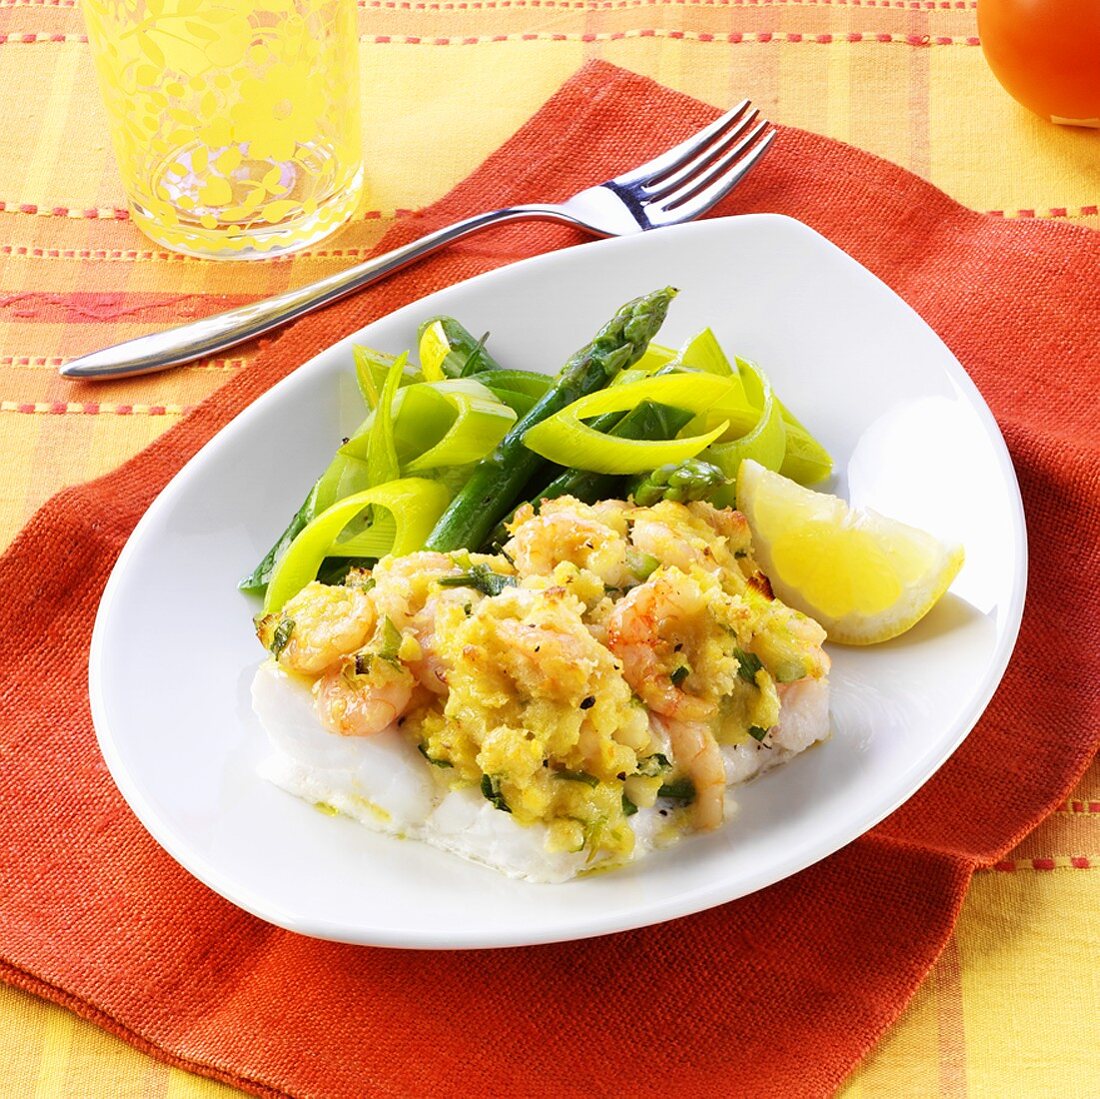 Fish fillet with shrimp and vegetable crust